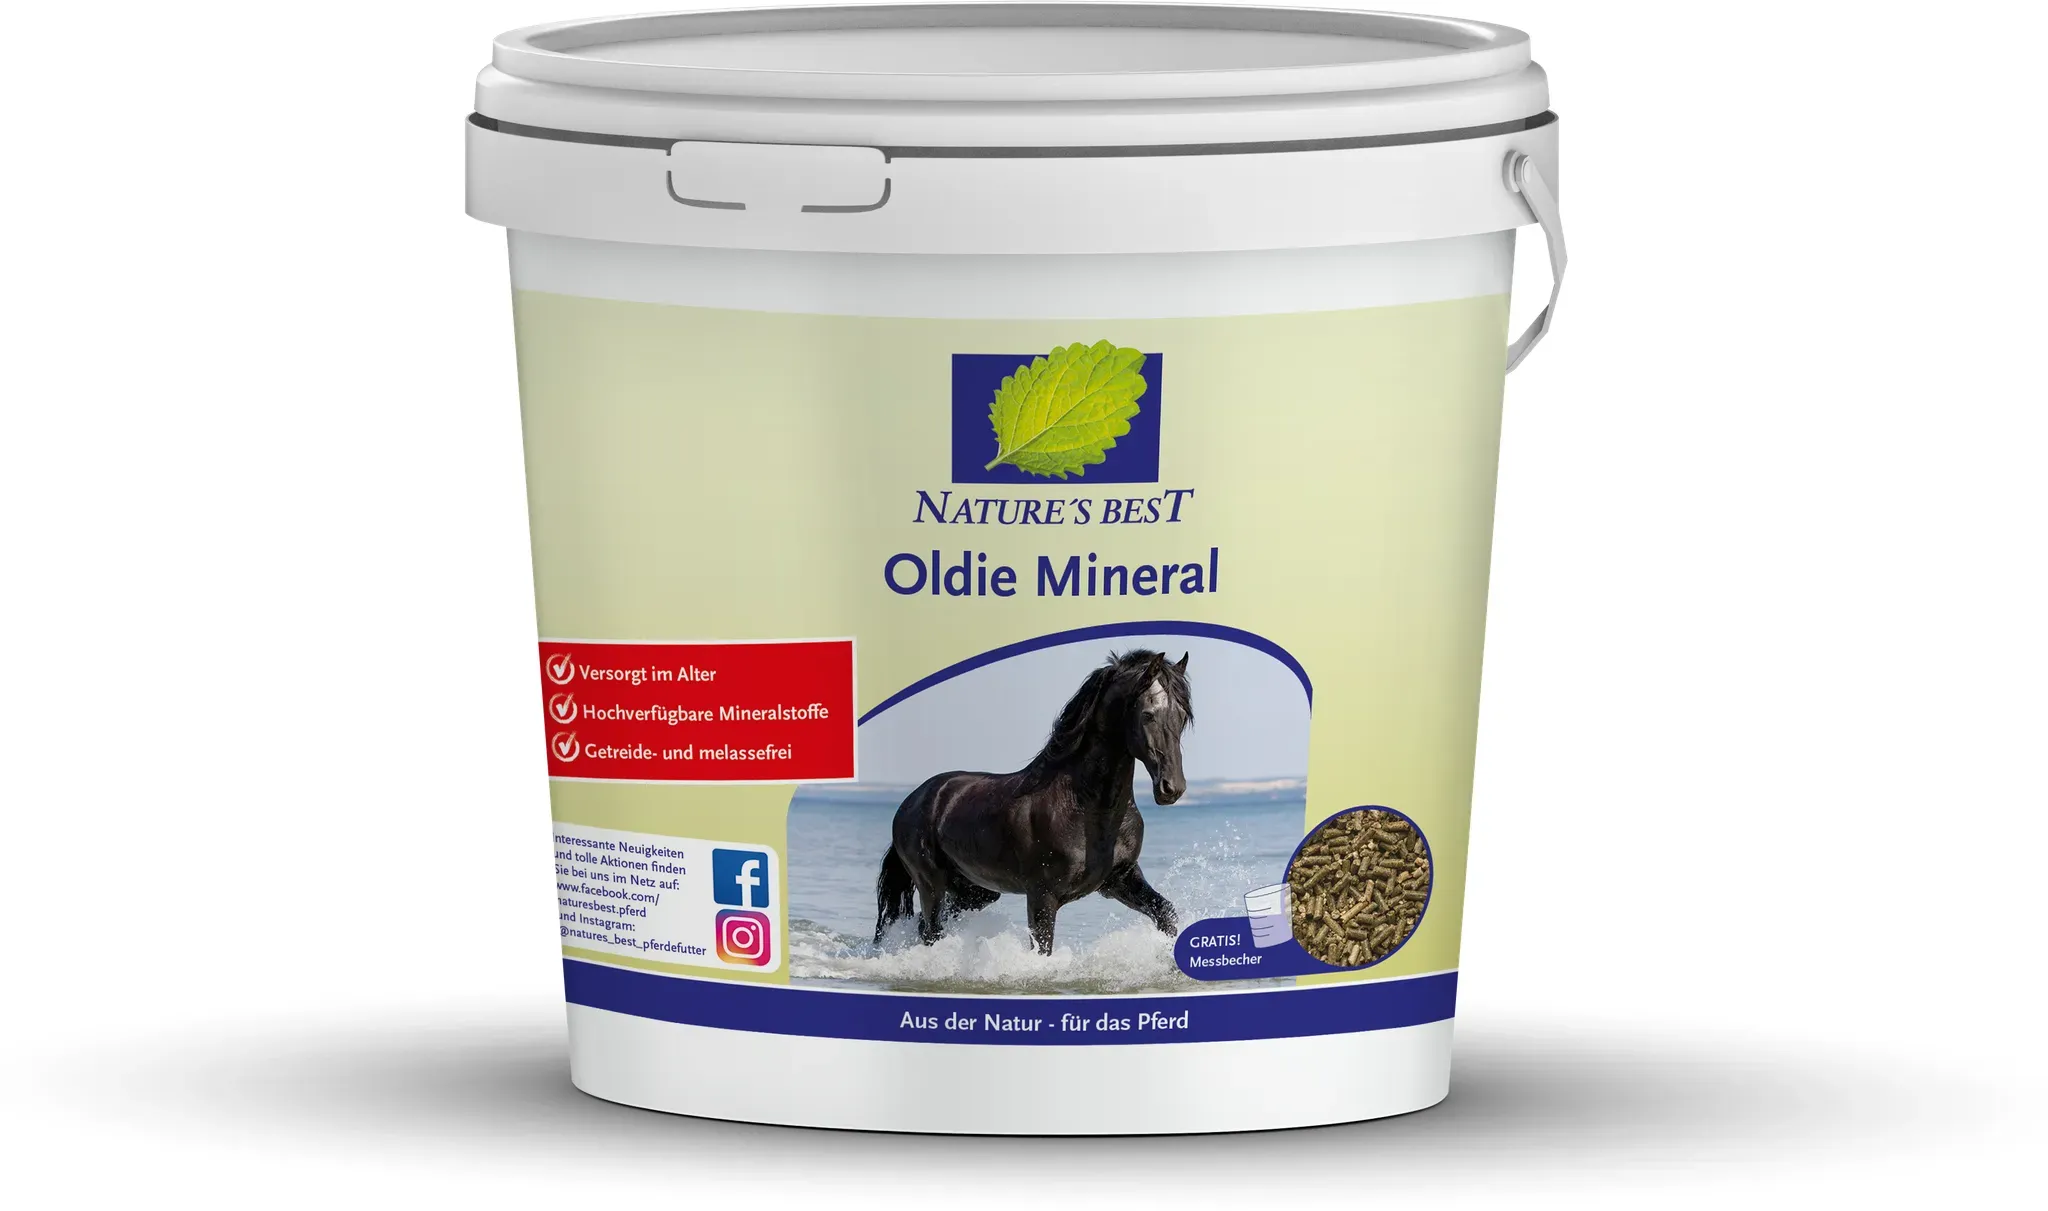 Nature’s Best Oldie Mineral